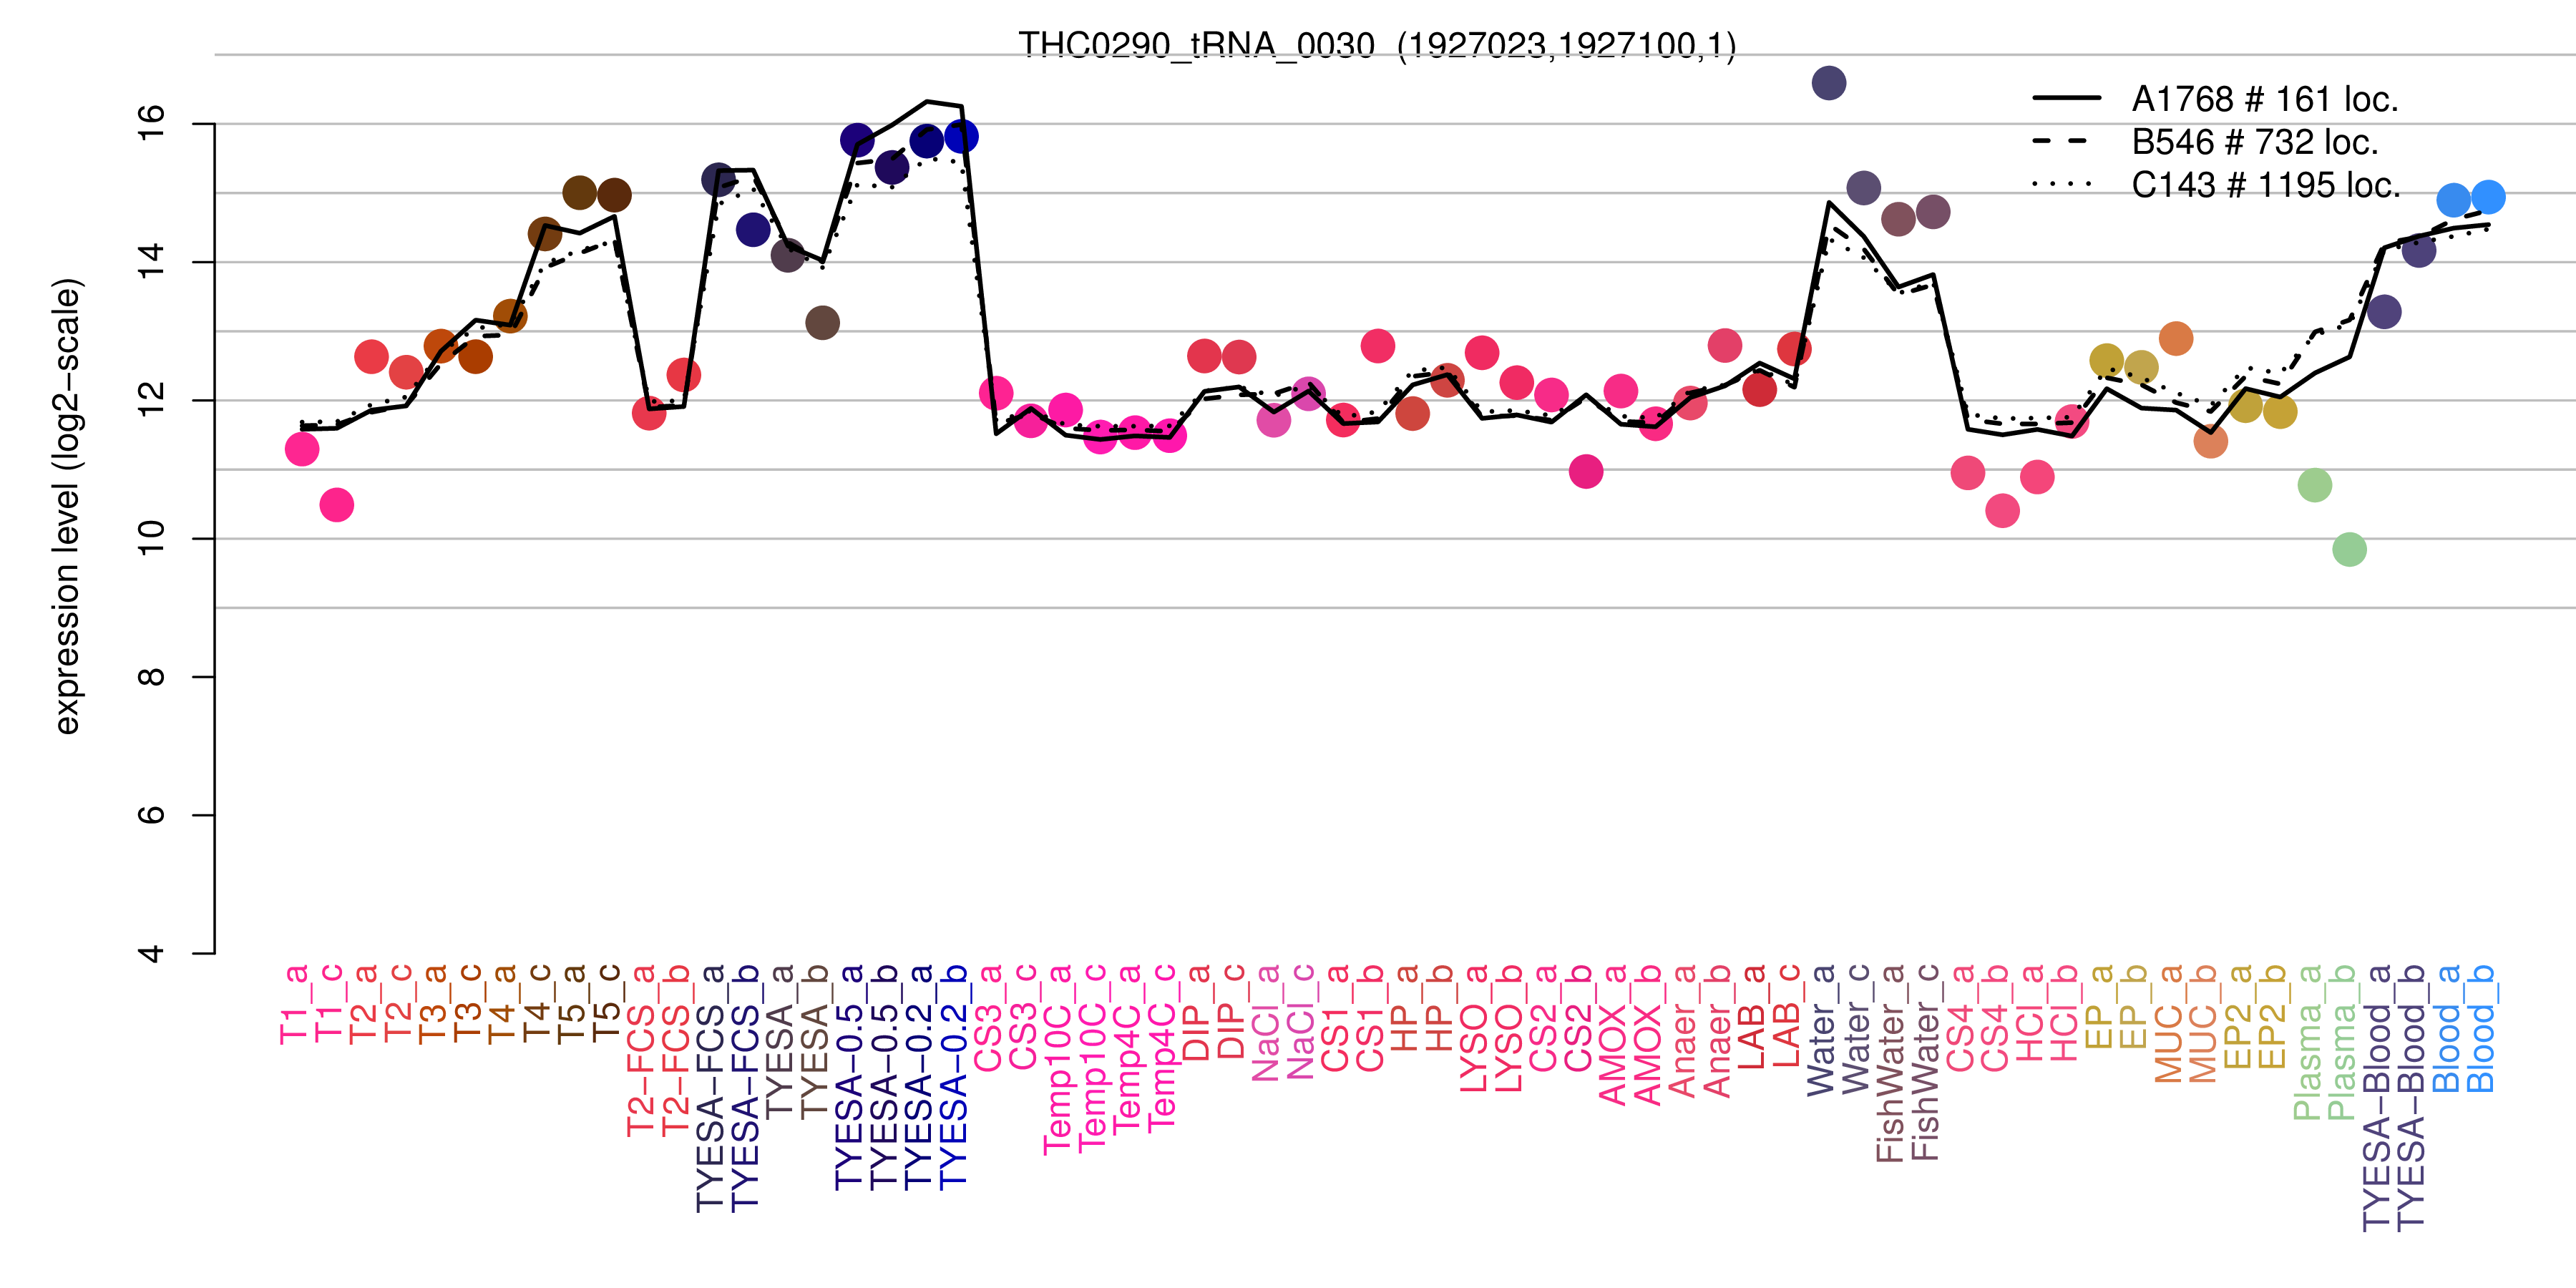 THC0290_tRNA_0030 expression levels among conditions